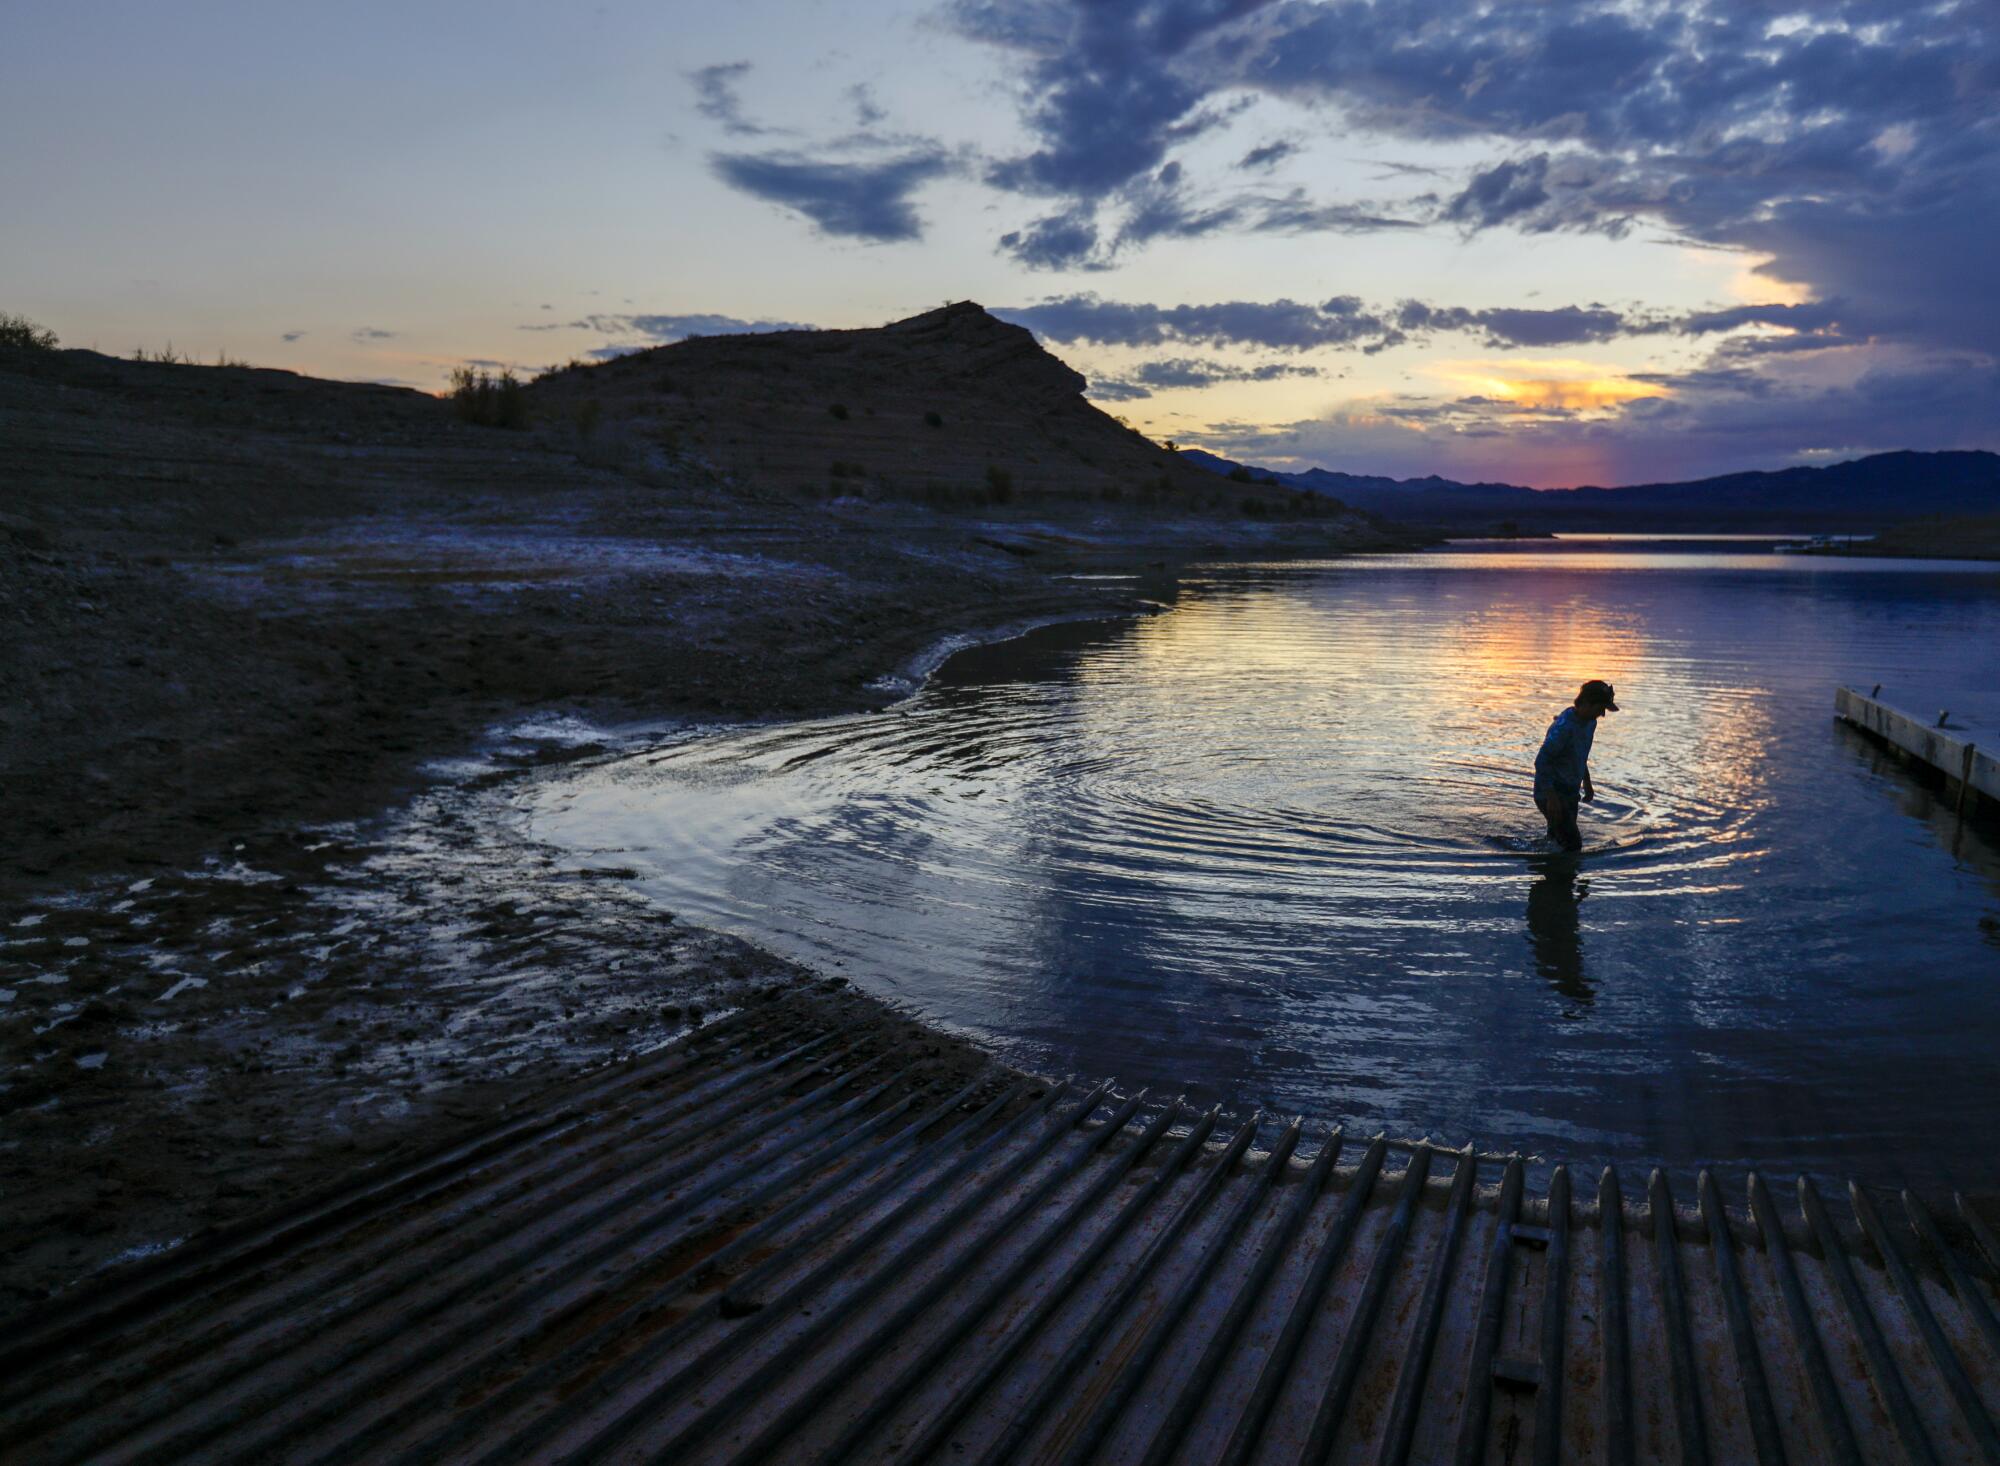 A man wades in shallow water at sunset